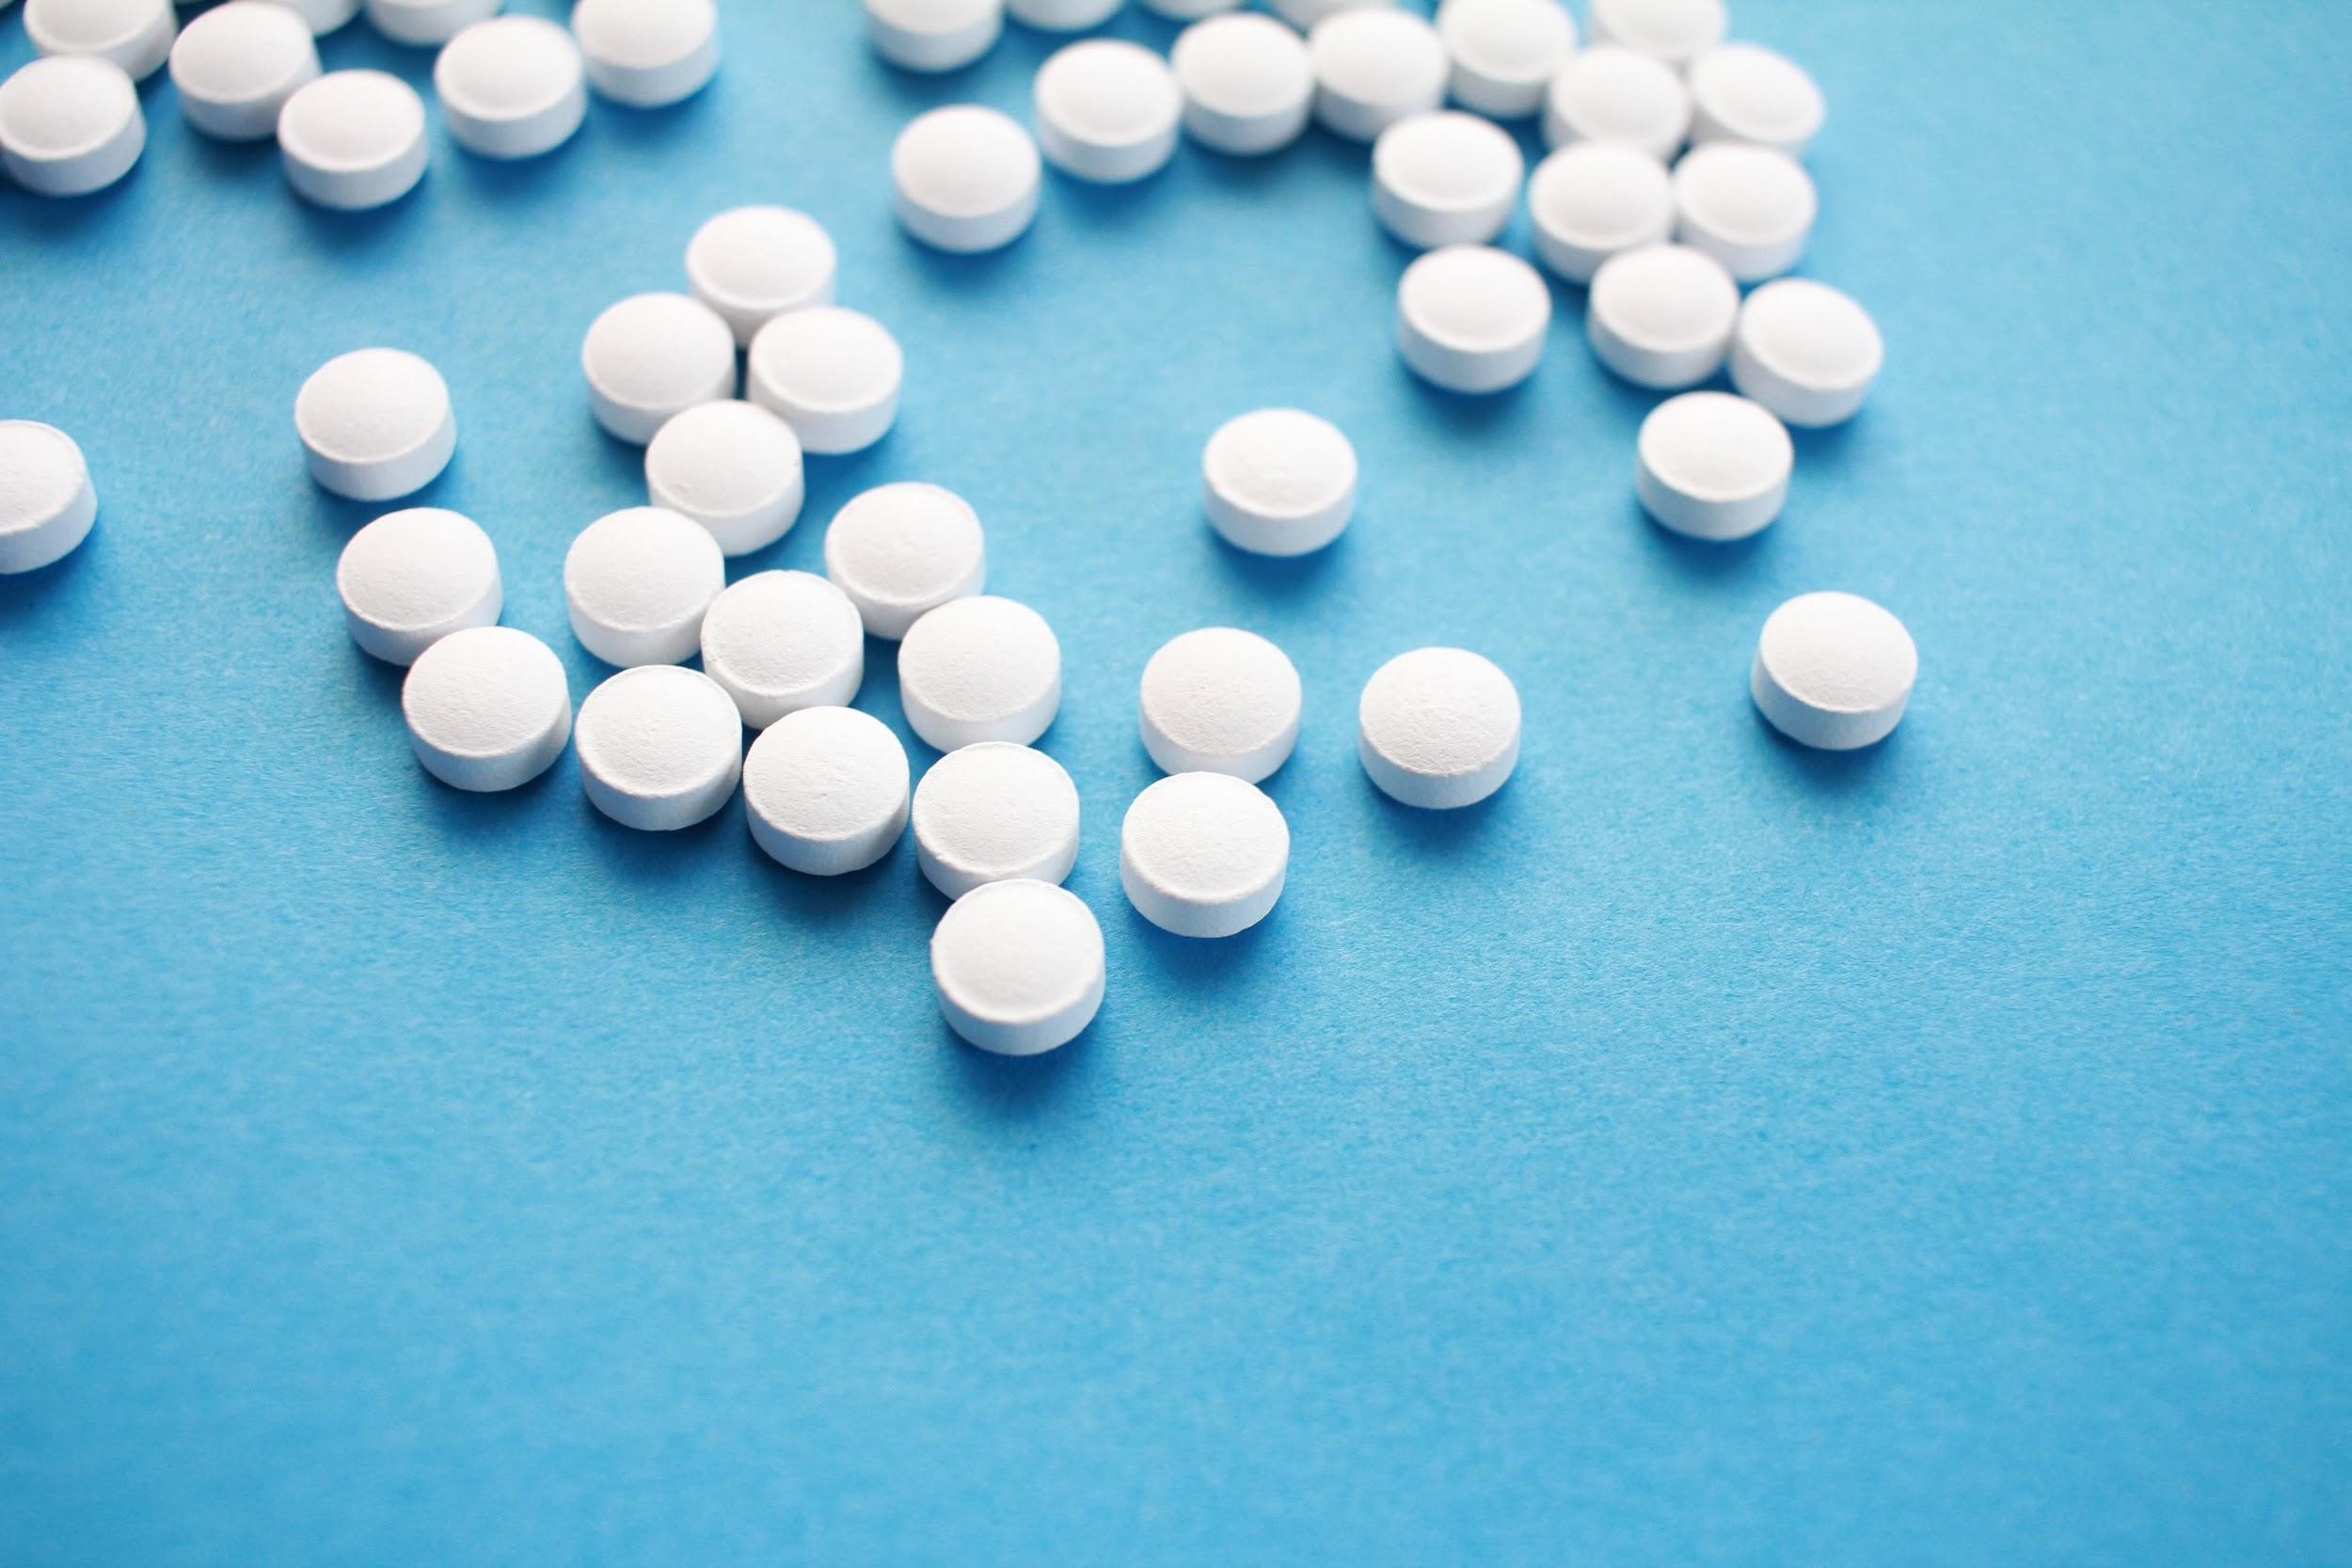 Azor (Amlodipine and Olmesartan): The Basics, Dosage, Side Effects, and Others